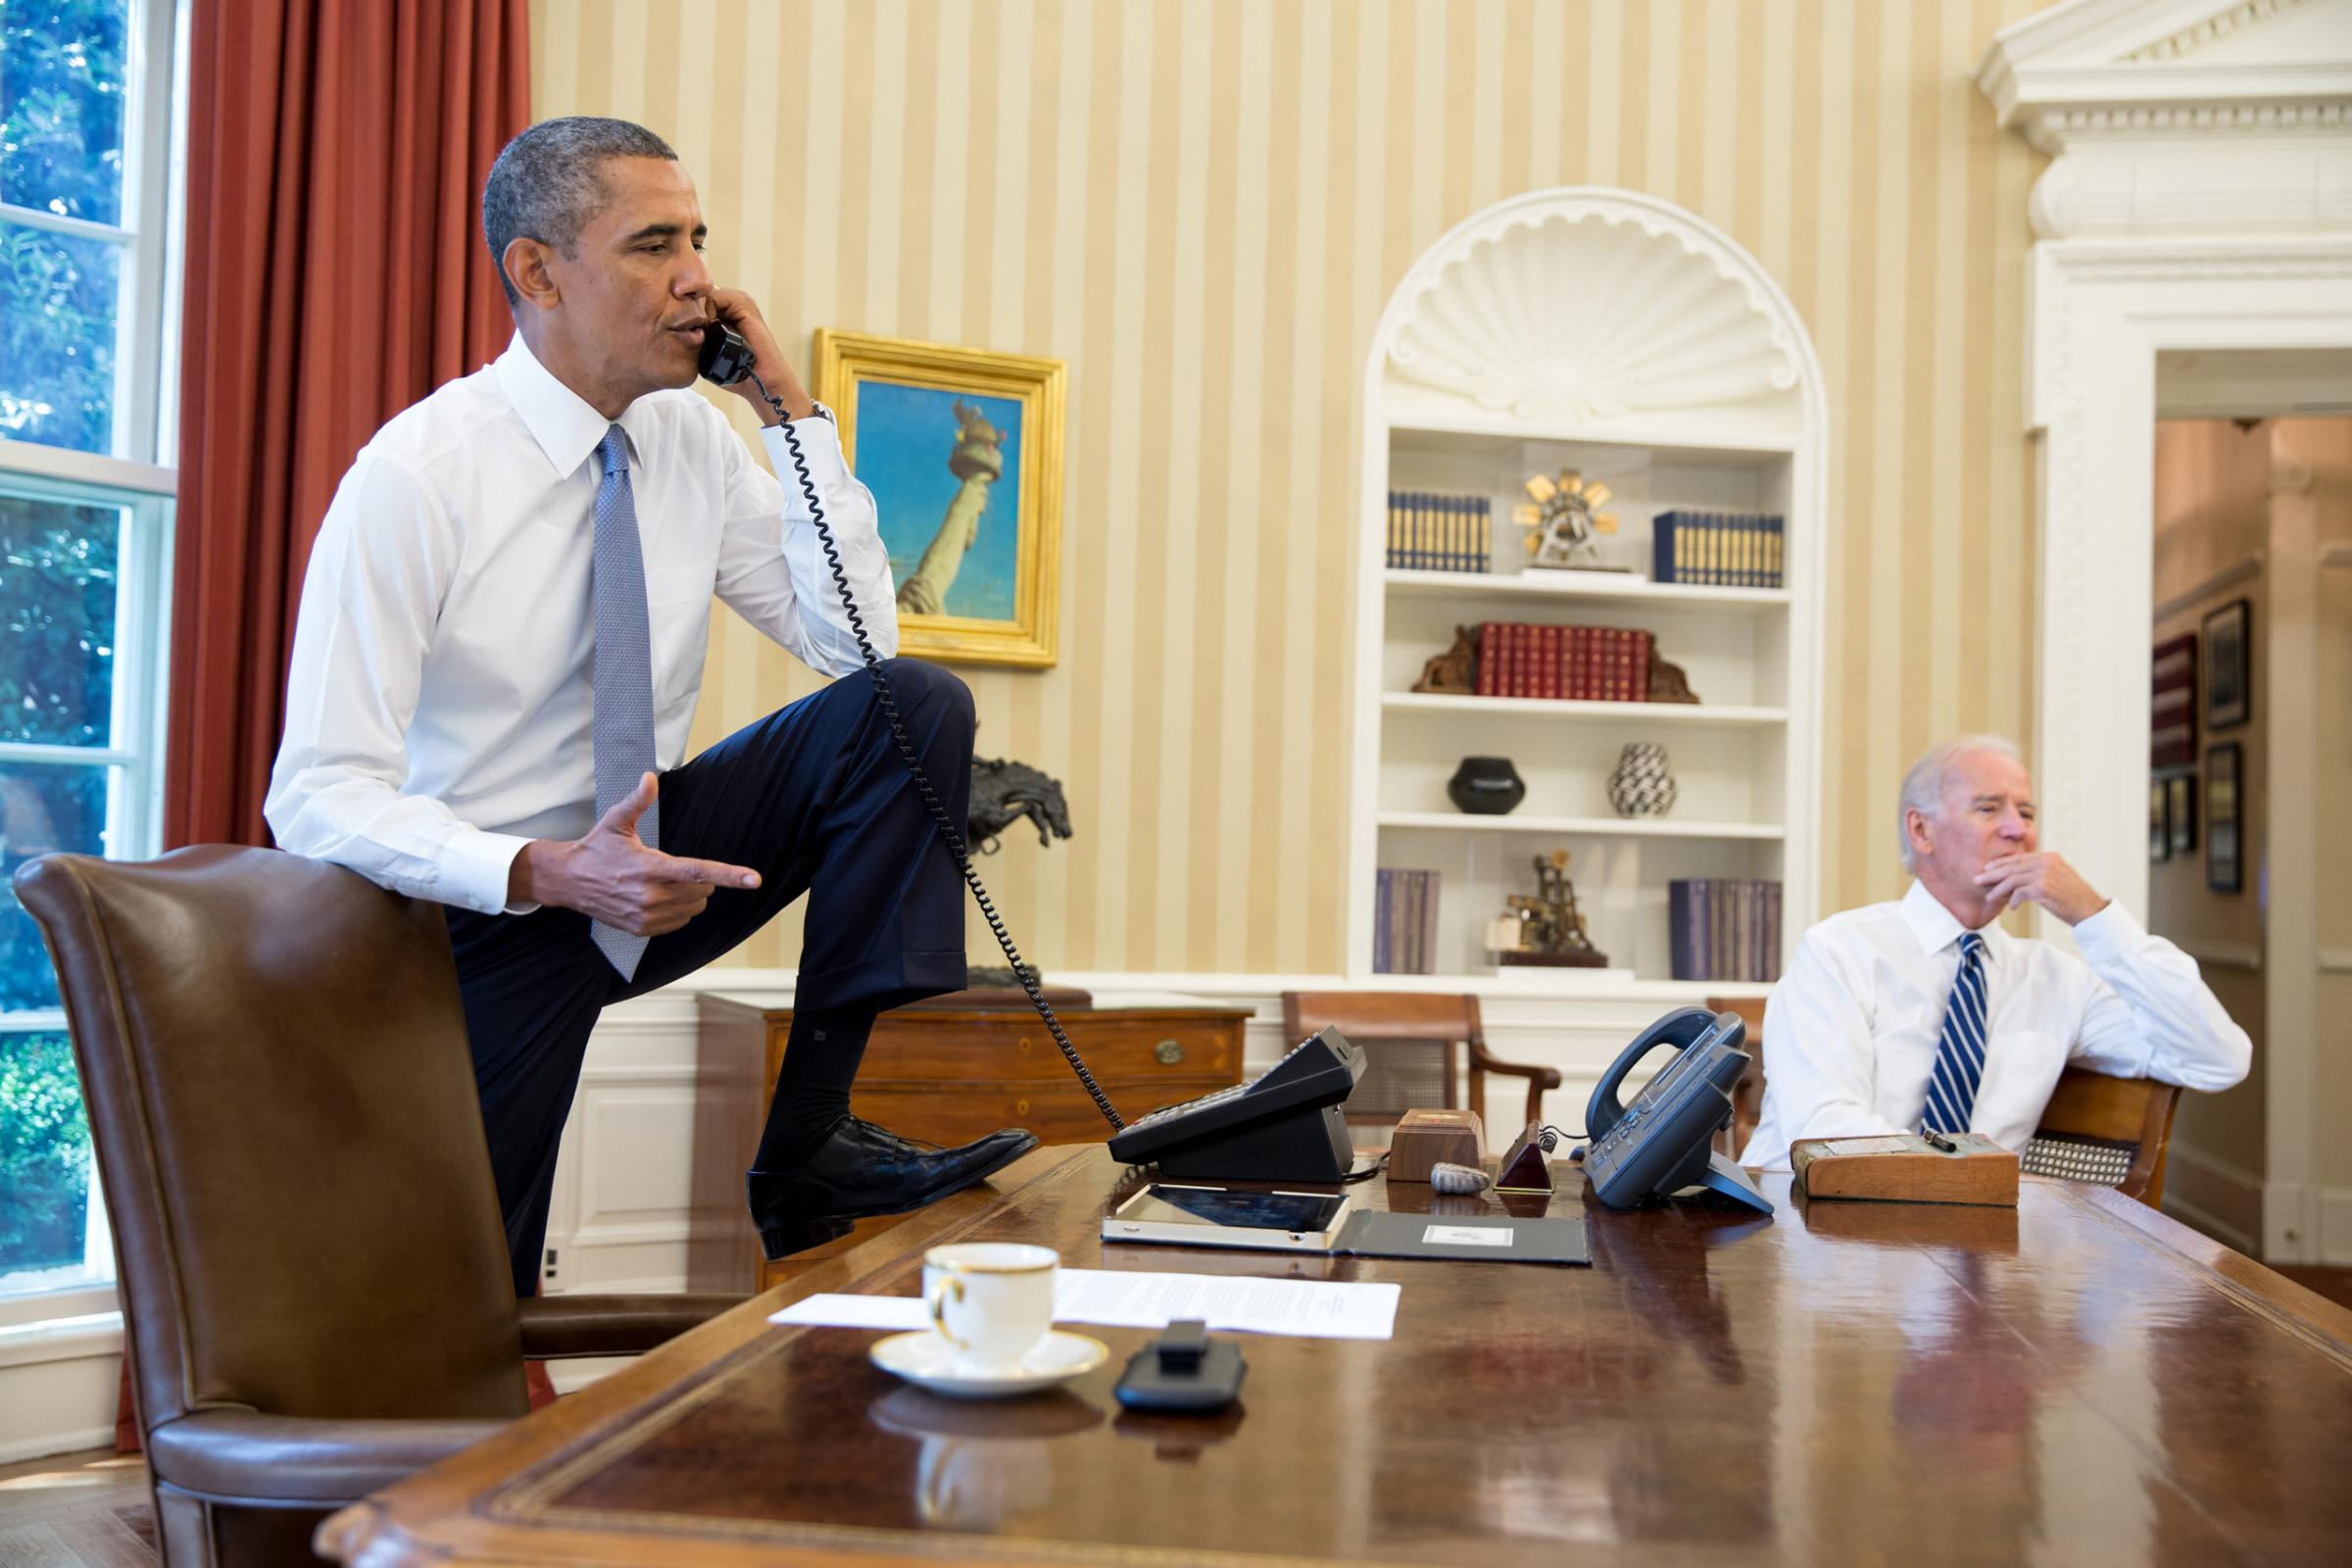 U.S. President Barack Obama (L) talks on the phone with Speaker of the House Boehner as Vice President Joe Biden listens in the Oval Office of the White House August 31, 2013 in Washington, DC.